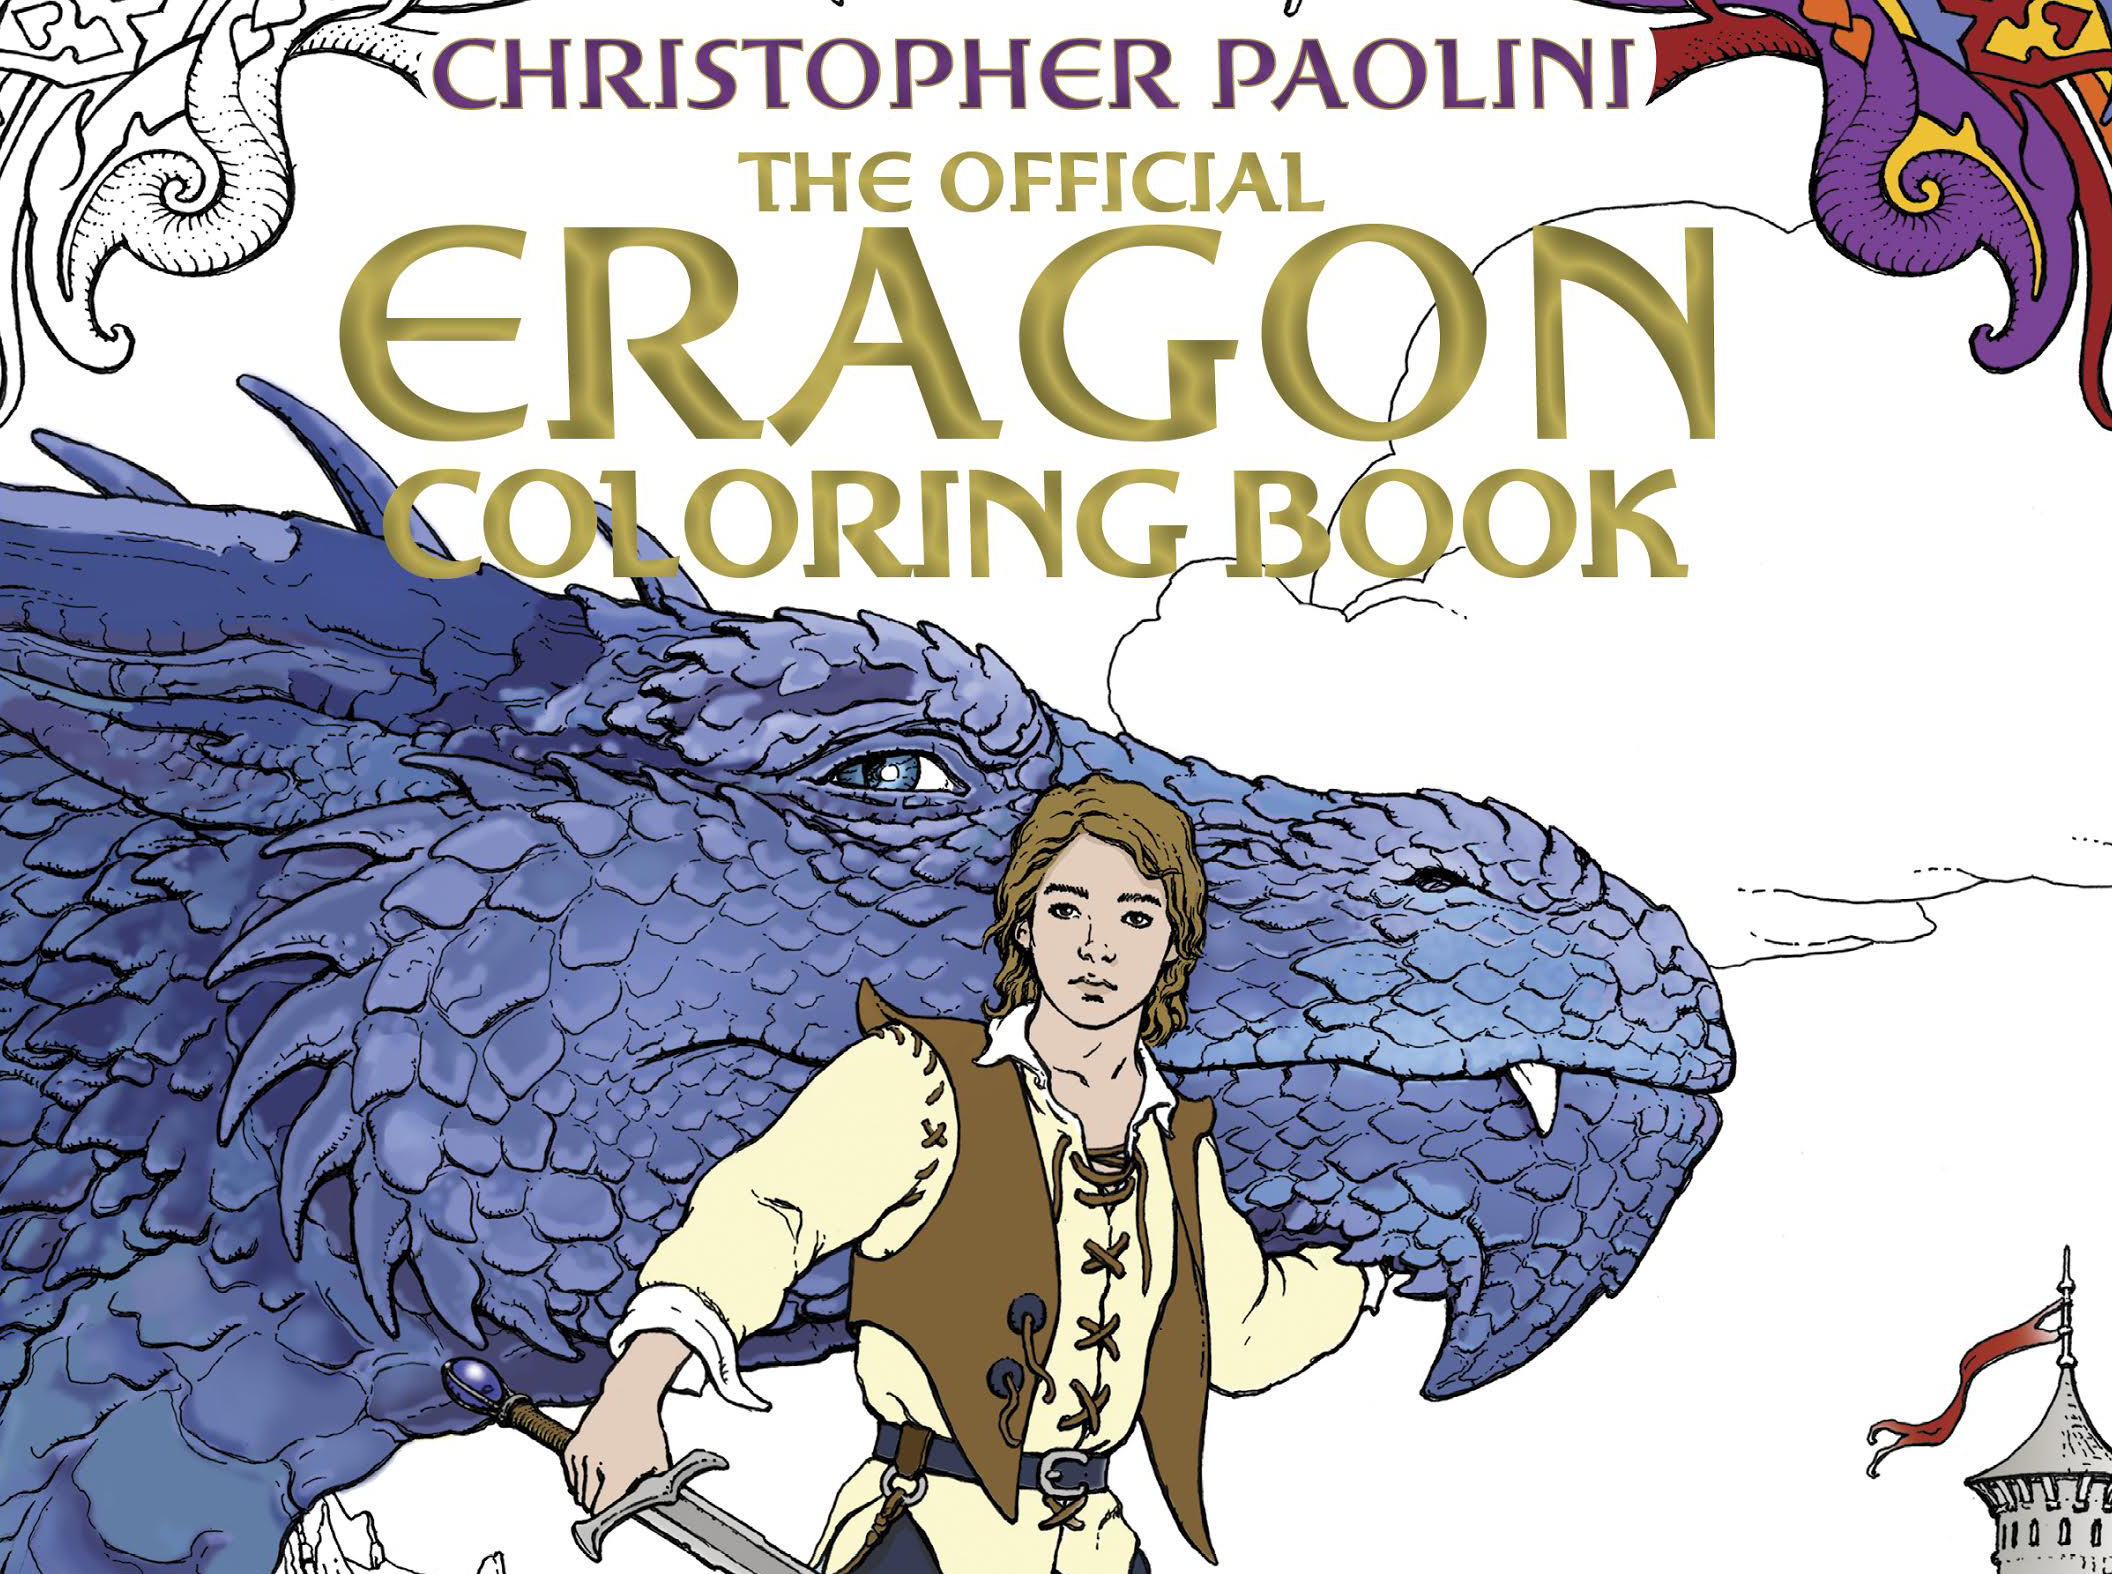 ‘Eragon Coloring Book’ announcement and cover reveal – coming May 2, 2017!